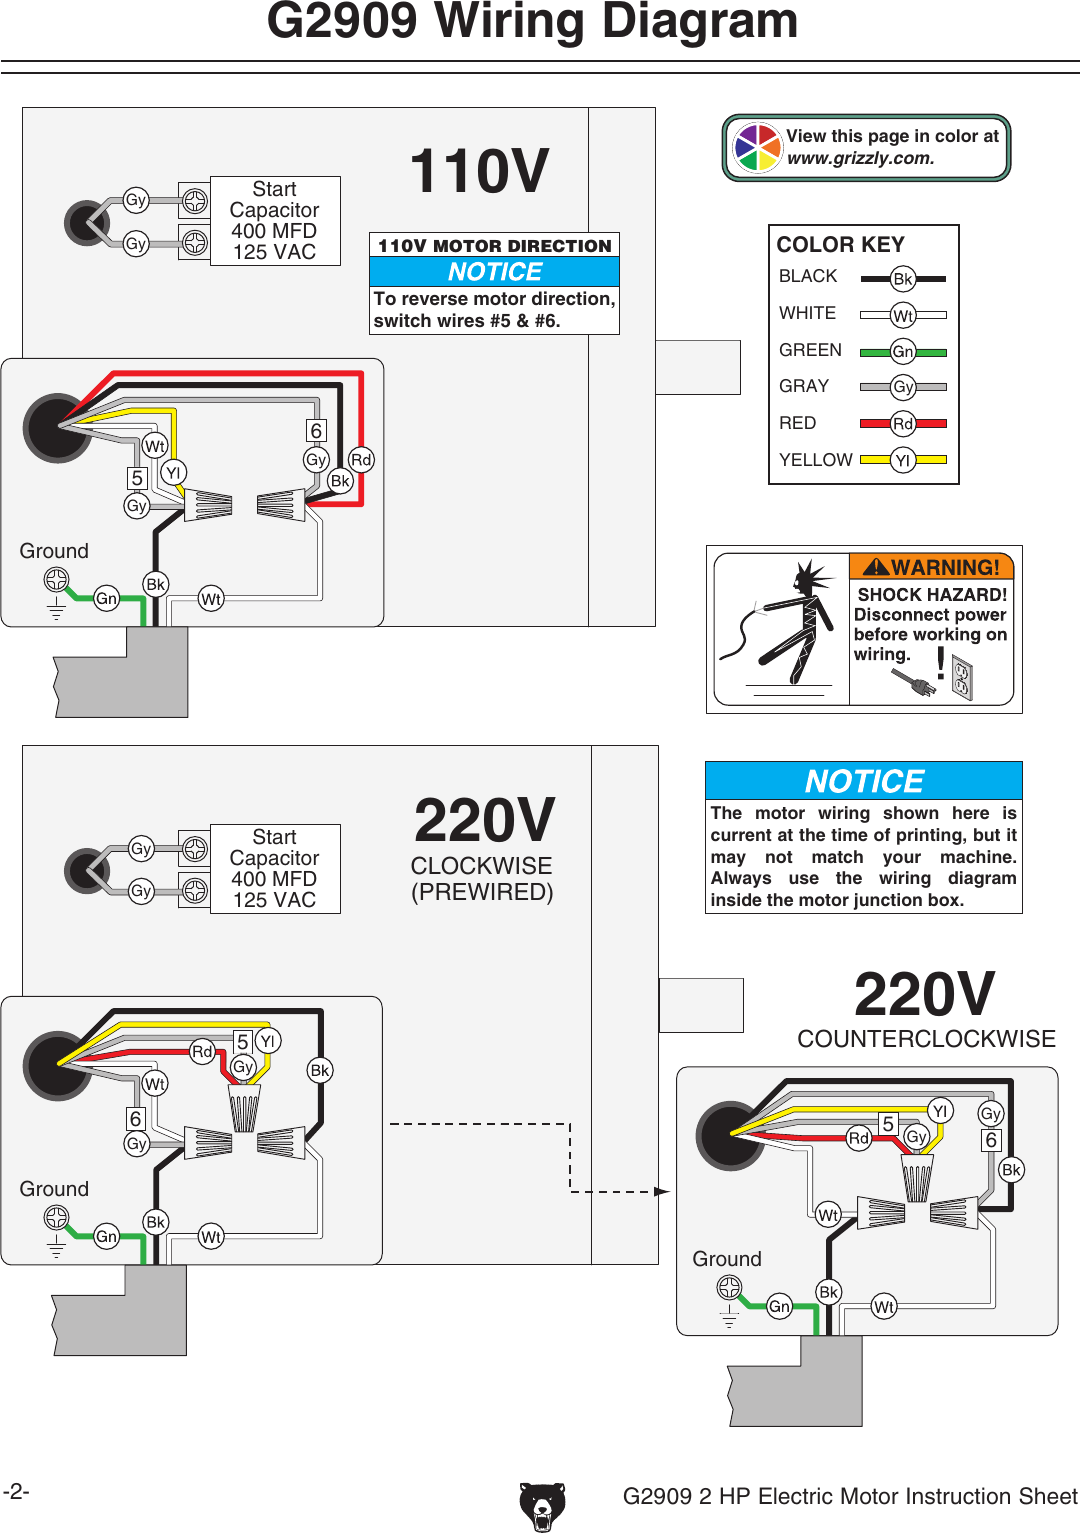 Page 2 of 2 - Grizzly G2909 Wiring Diagram User Manual  To The C2a44c36-2b6a-4226-93fc-c2c8c37cf40c